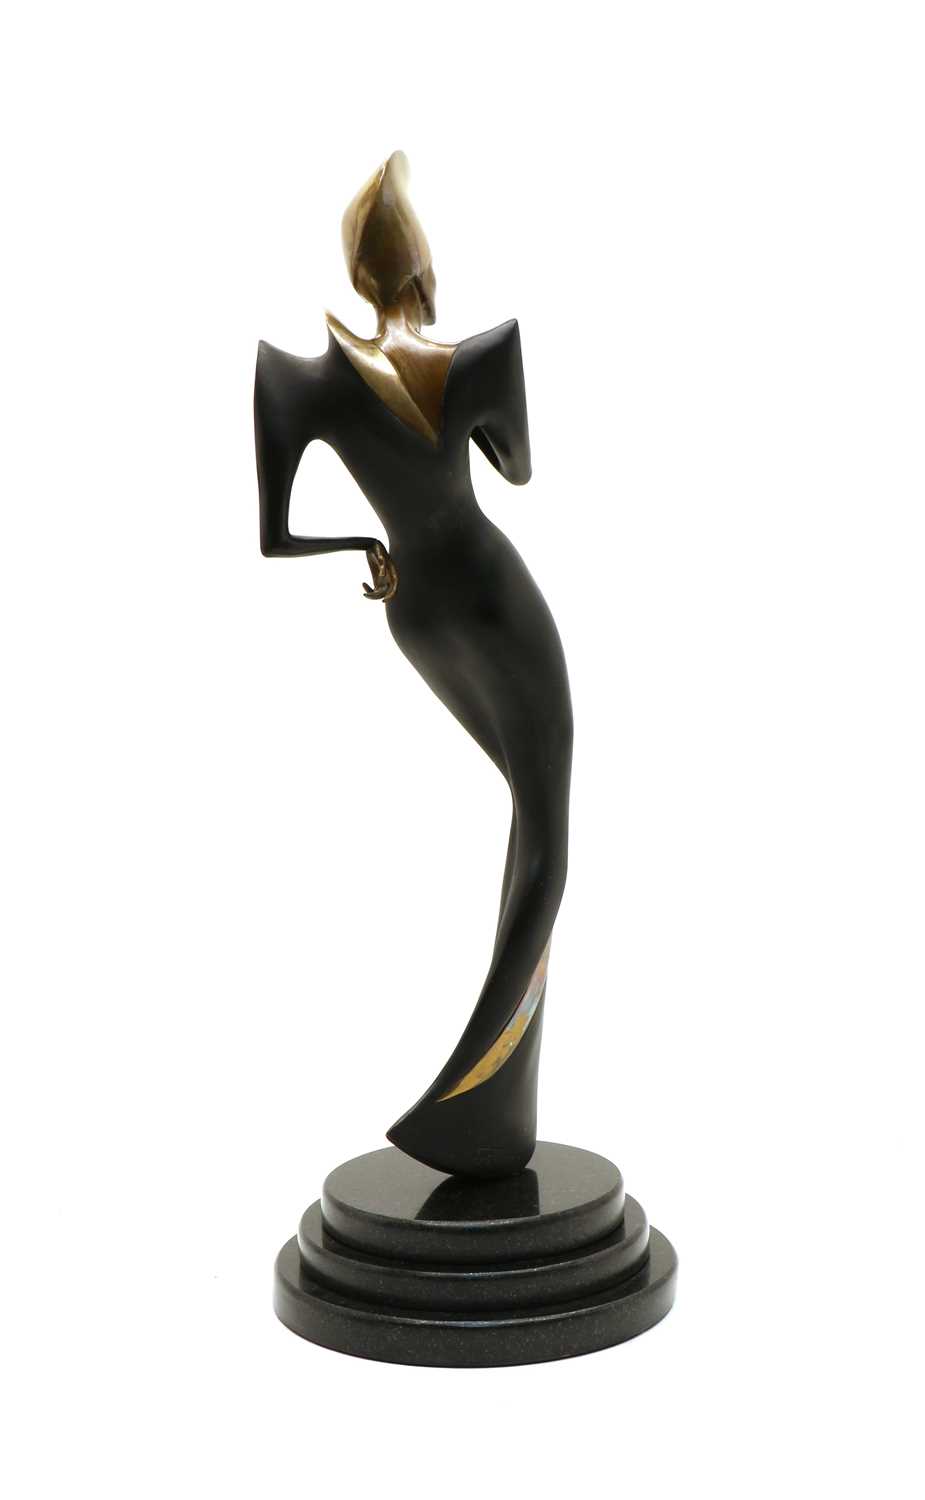 An Art Deco style bronze figure by Ann Froman, - Image 2 of 3